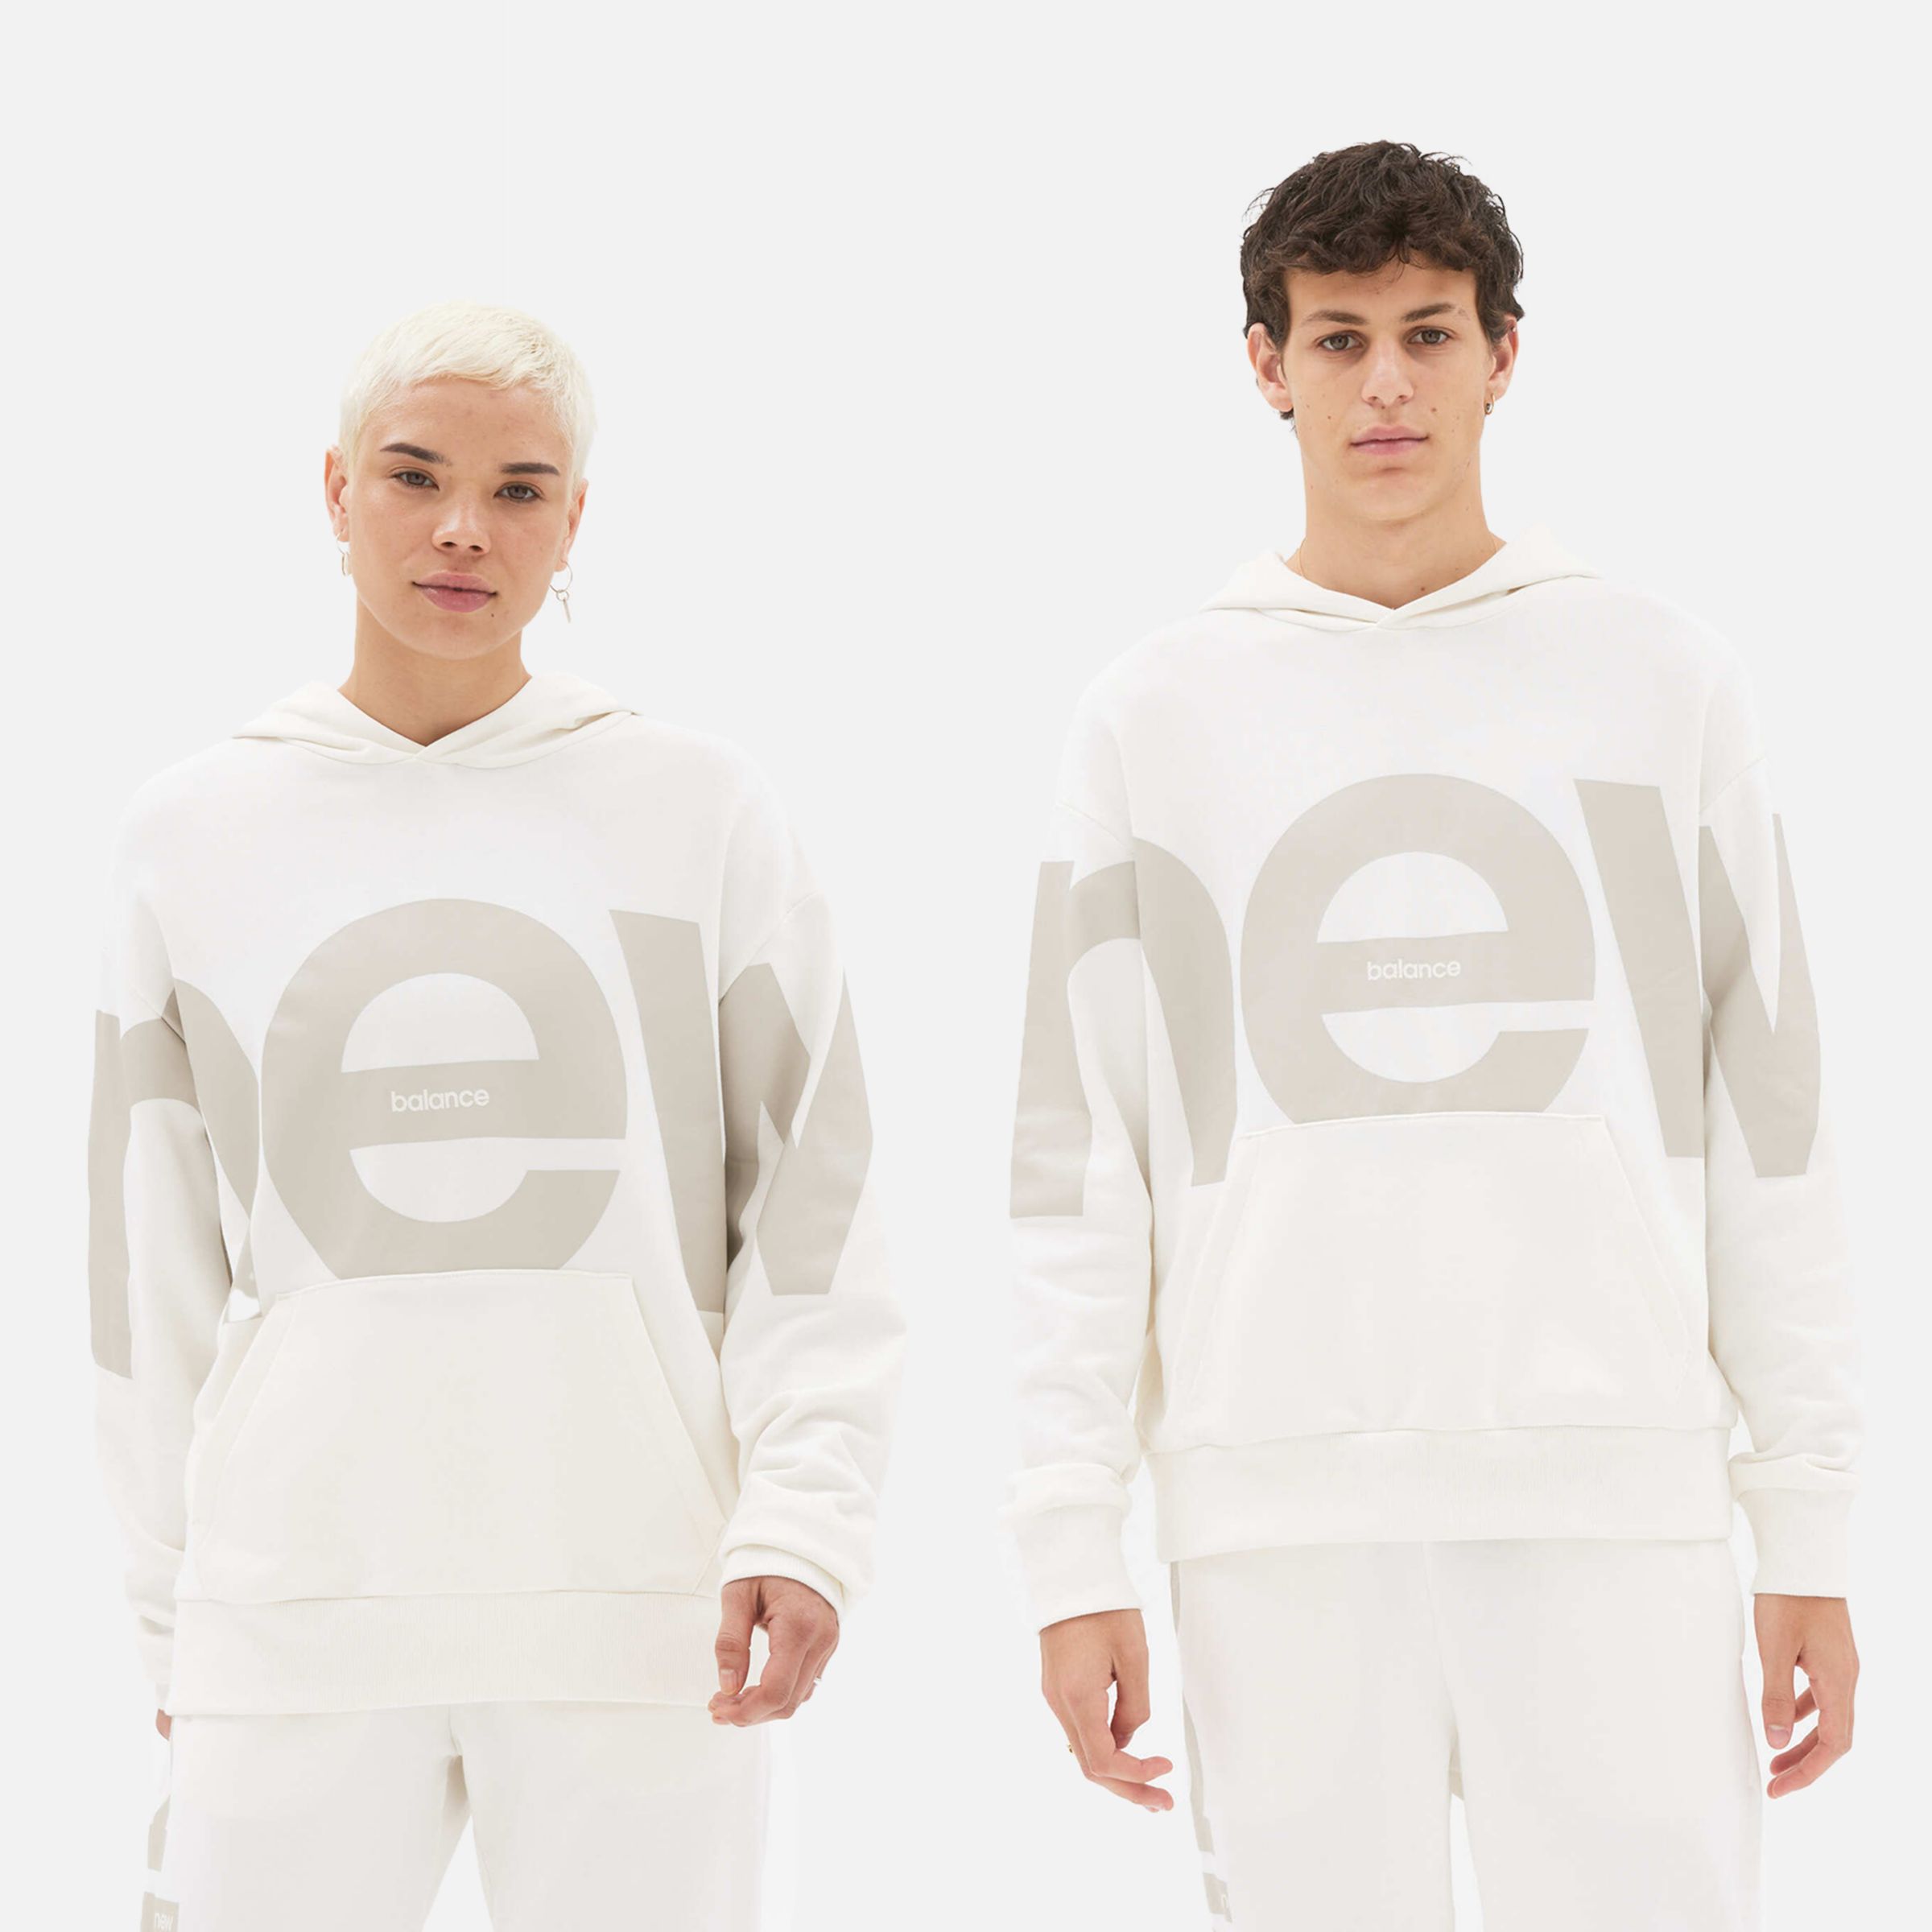 NB NB Athletics Unisex Out of Bounds Hoodie, , swatch